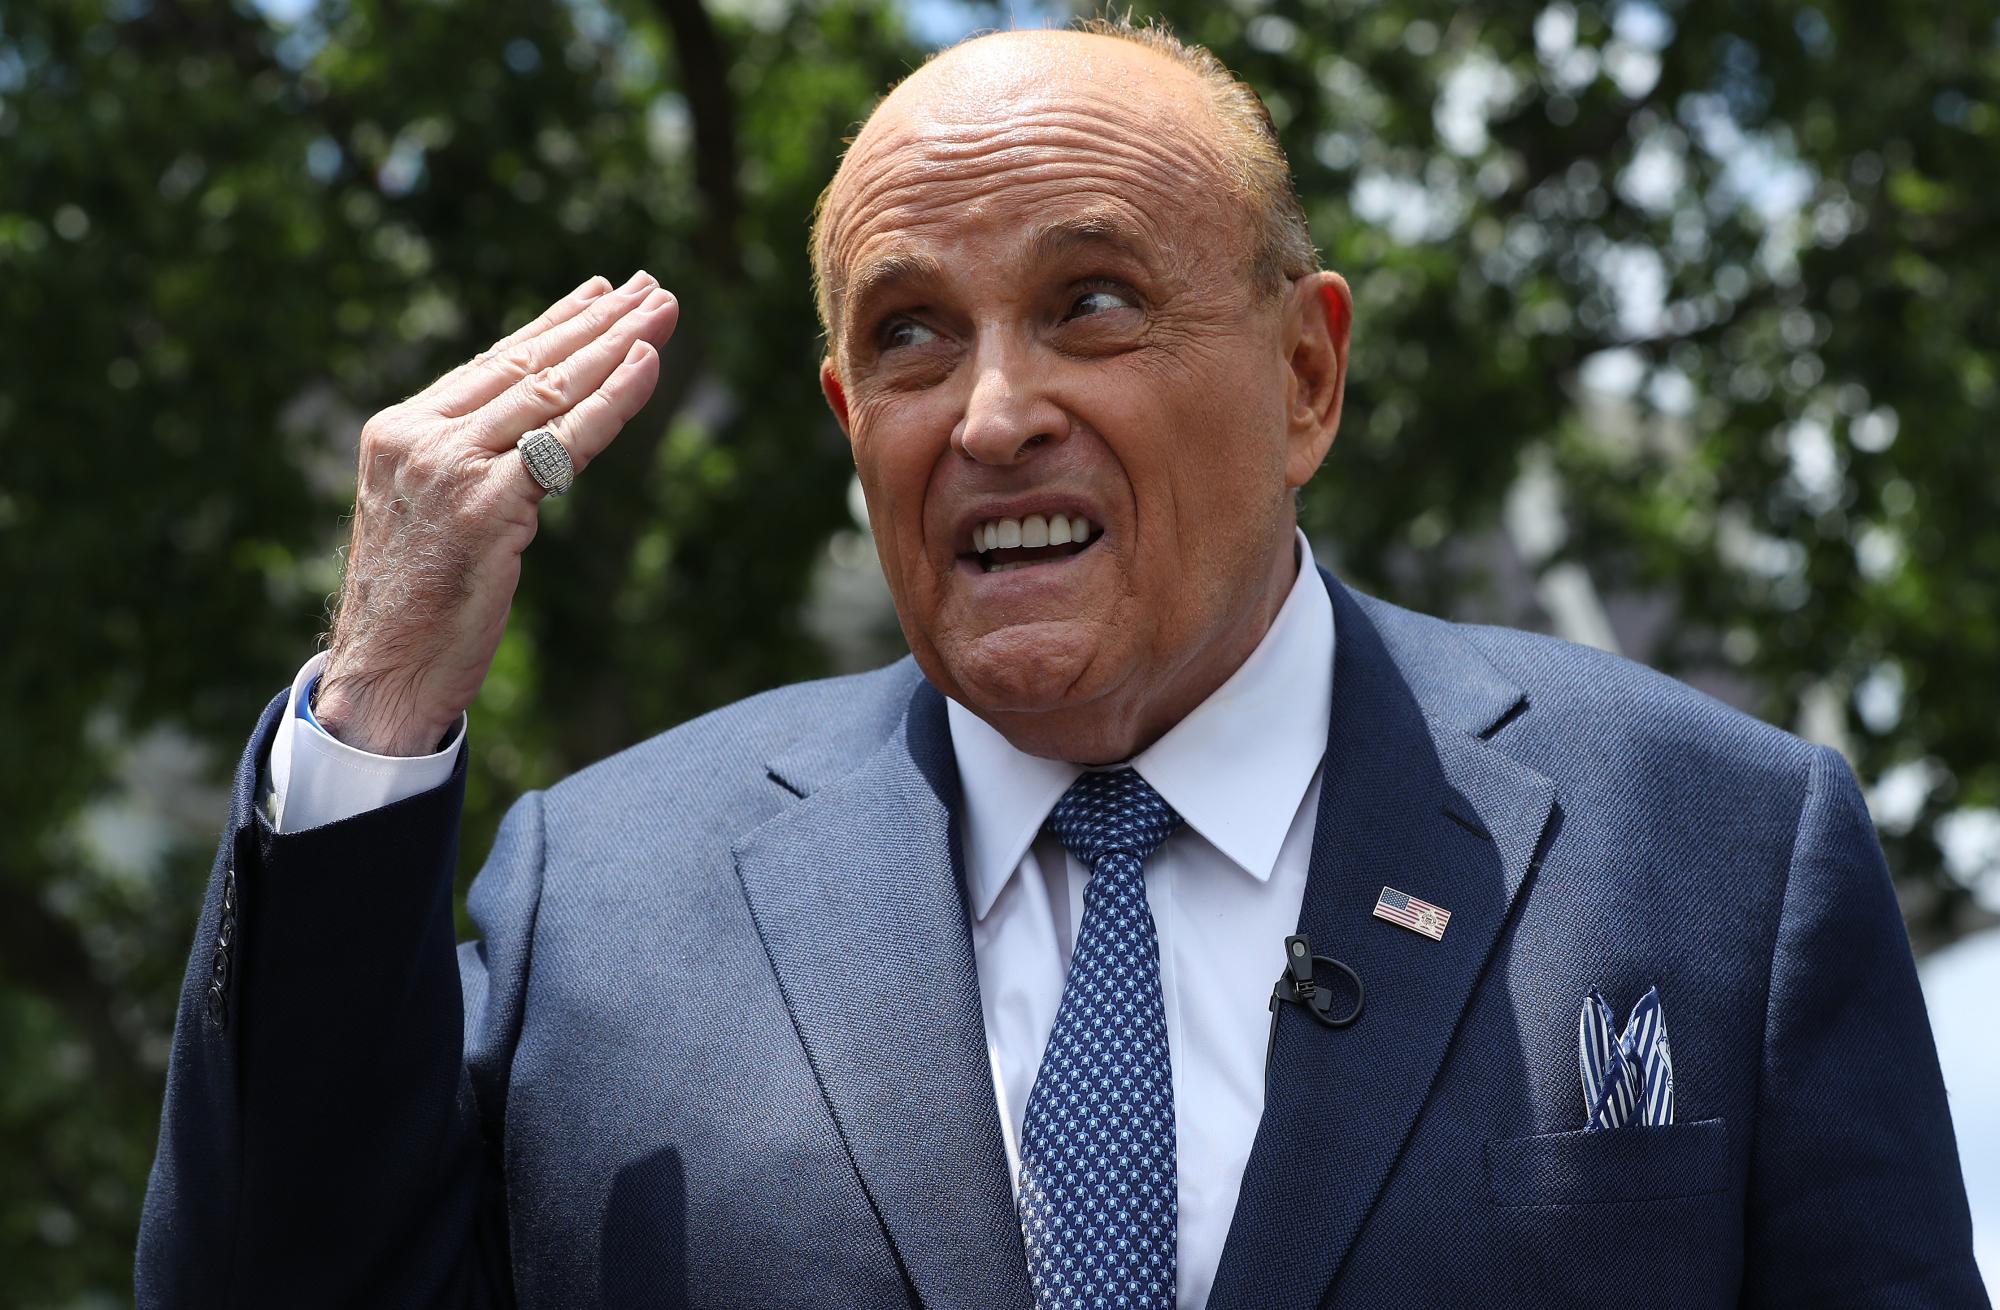 amazon, could you get by on a measly $43,000 a month? it seems rudy giuliani can’t